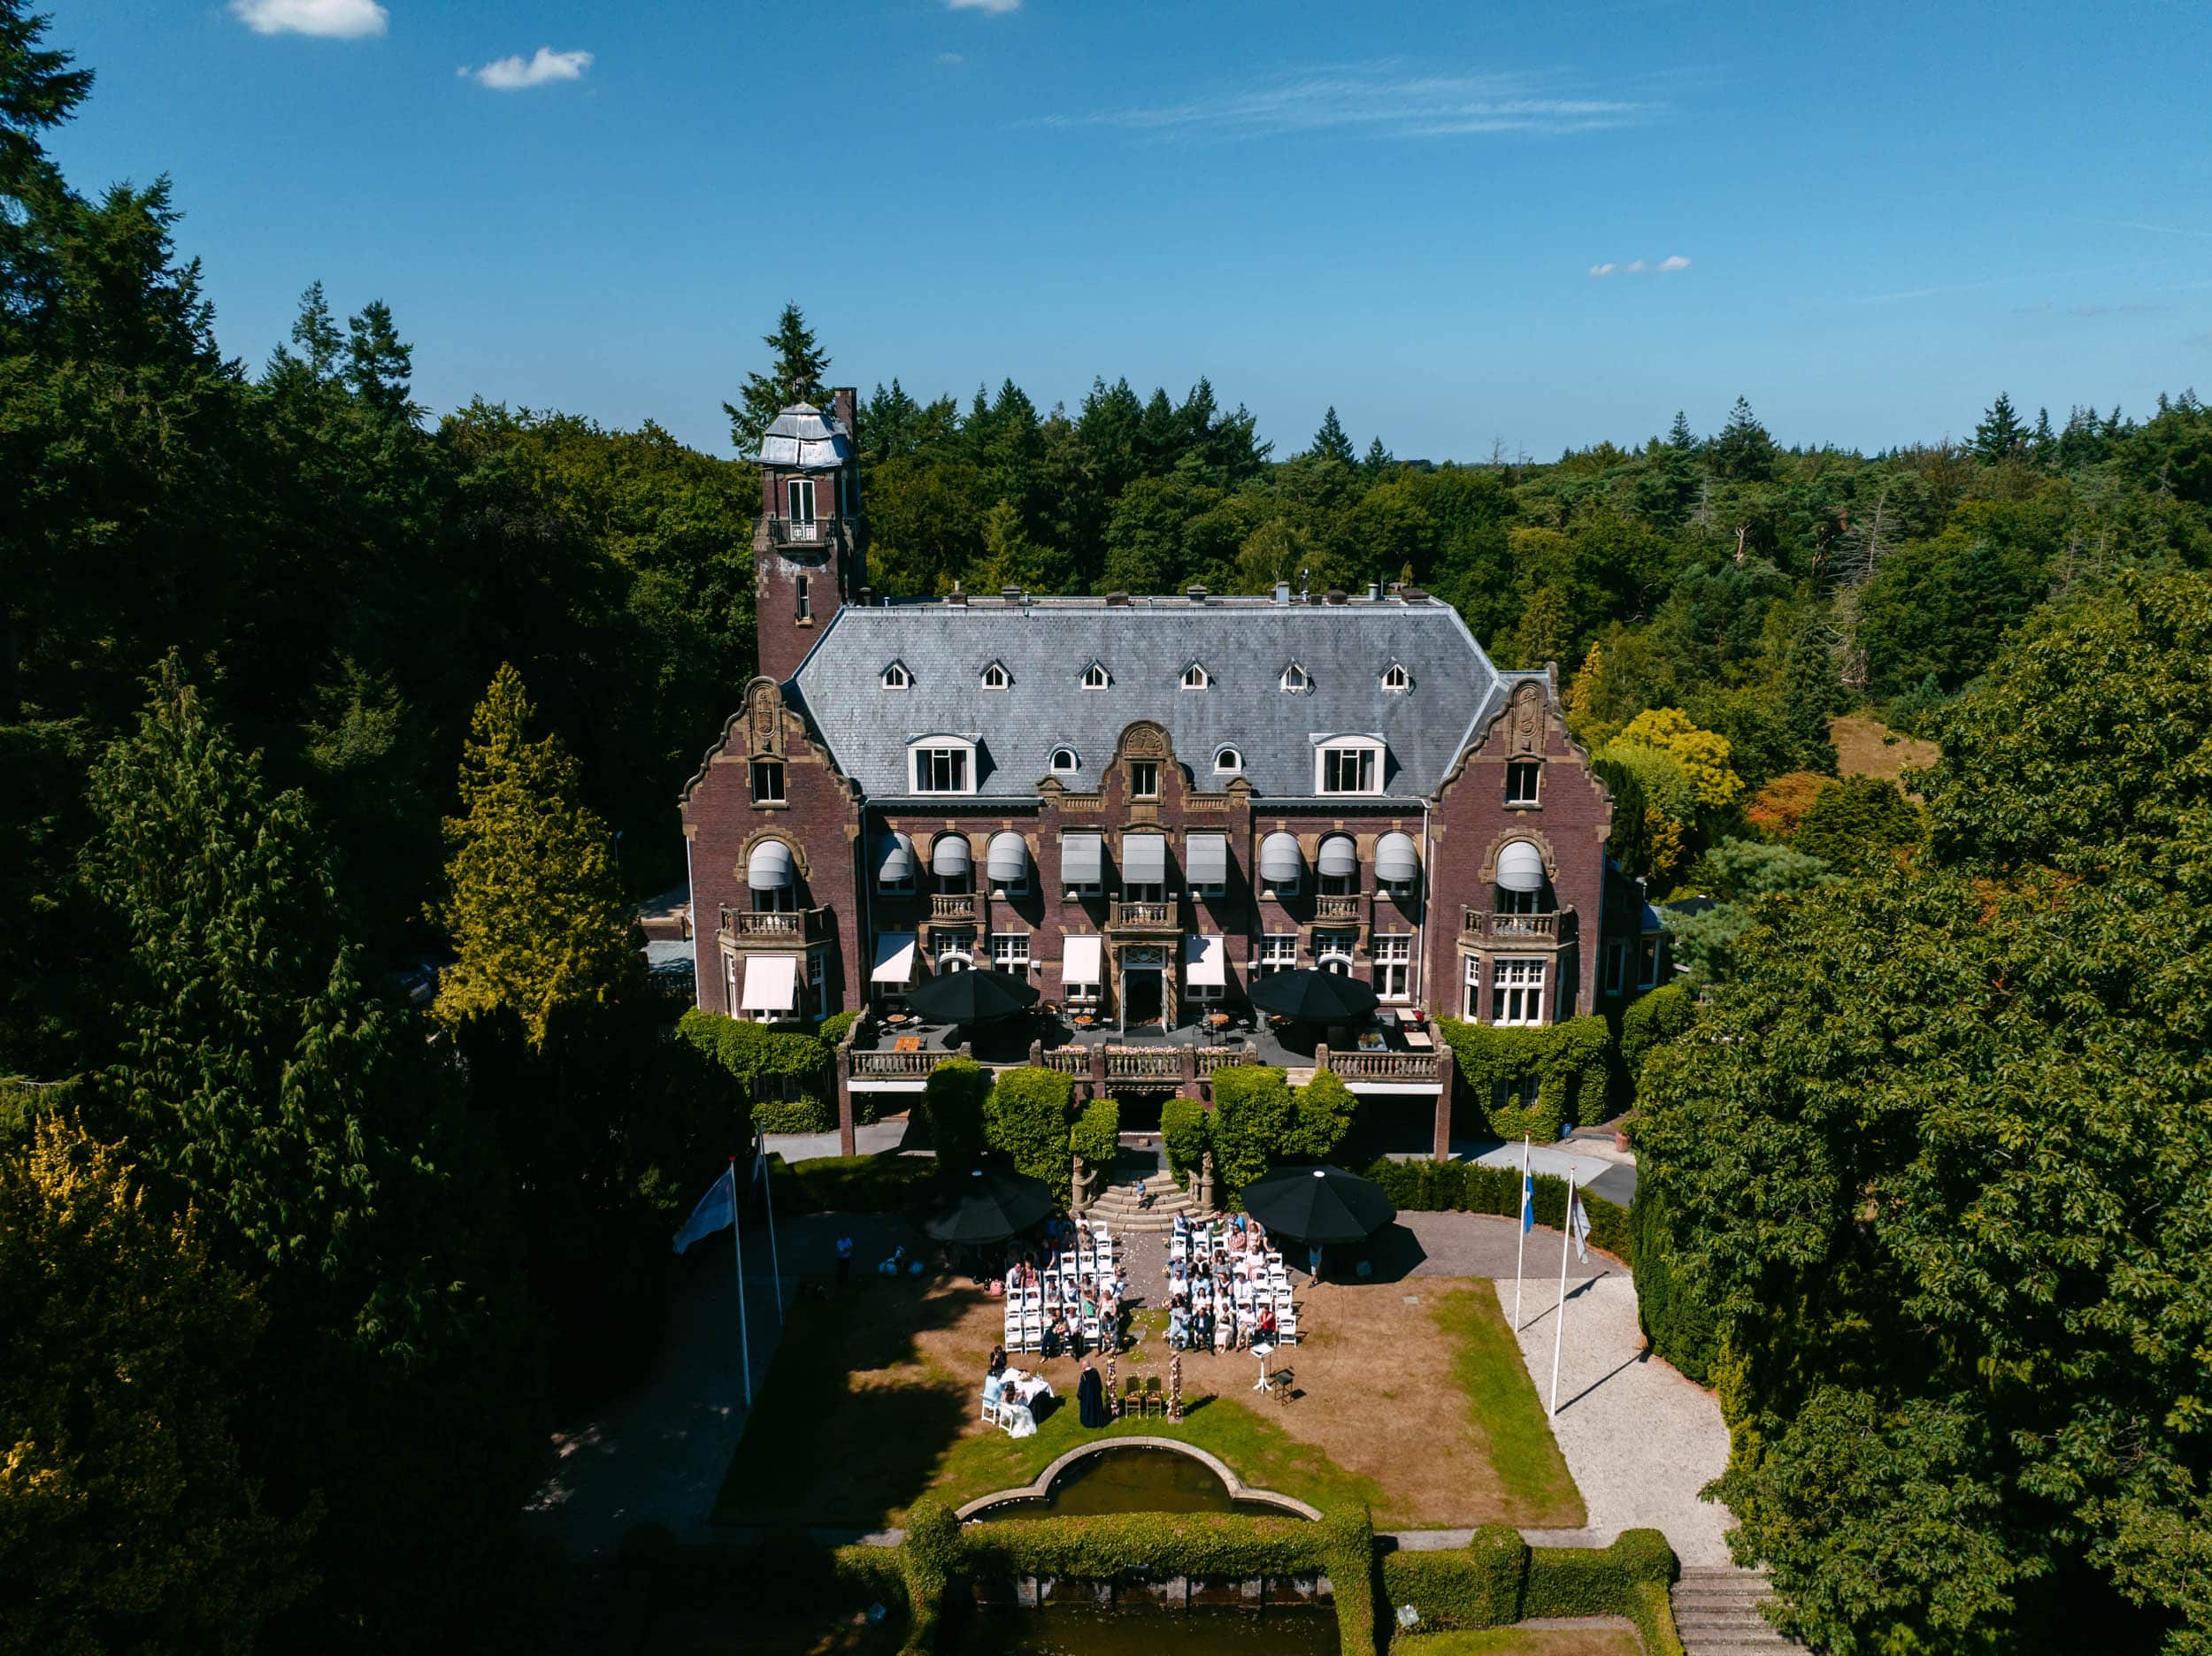 An aerial view of a large mansion surrounded by trees.